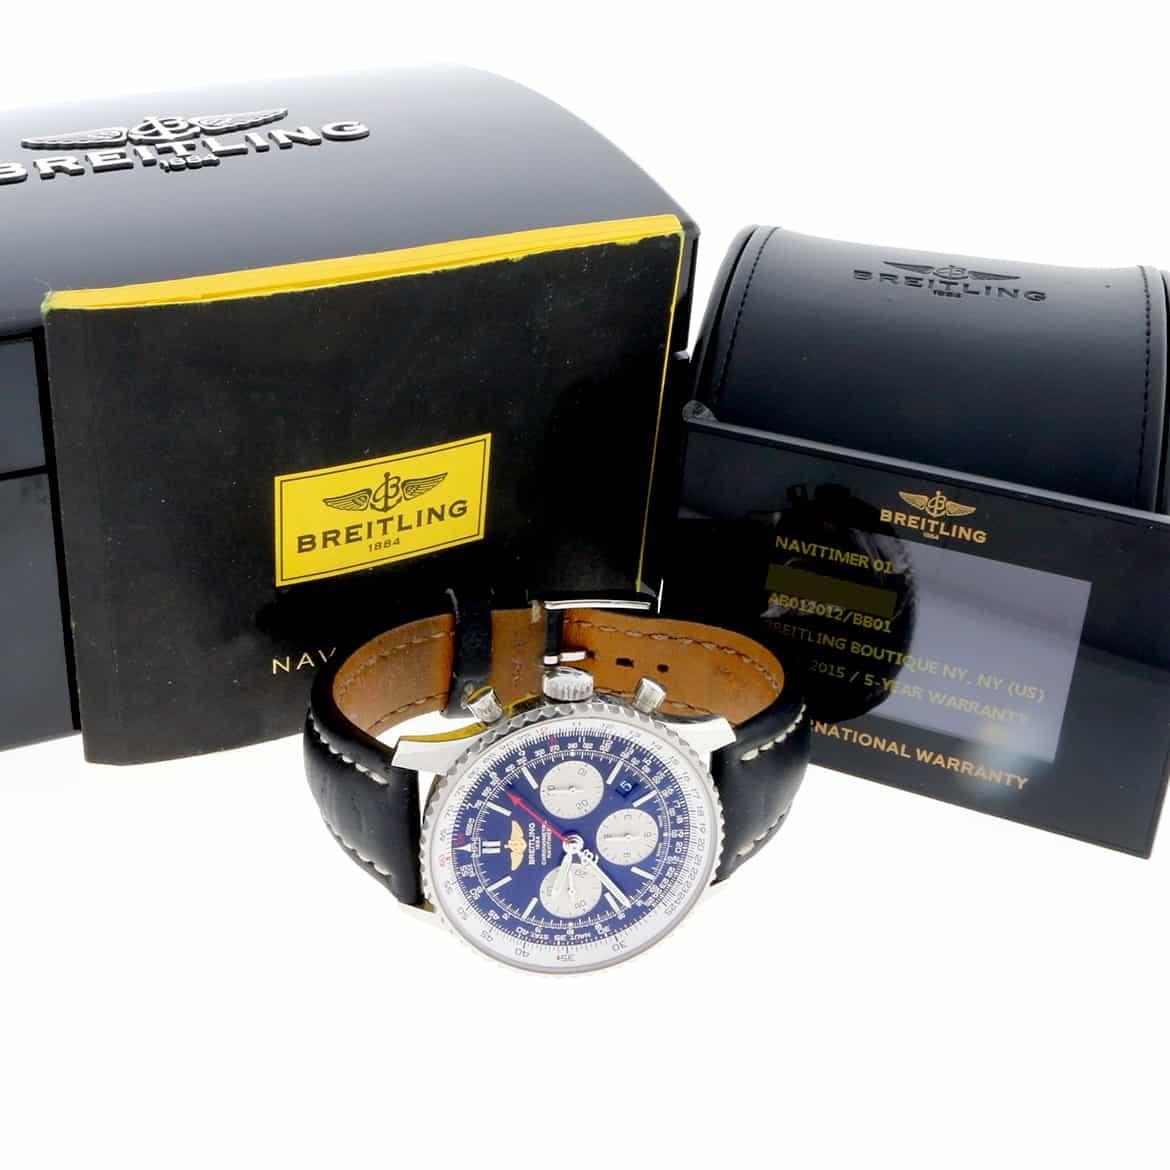 Breitling Navitimer 01 Chronograph Black Dial Automatic Watch For Sale 4